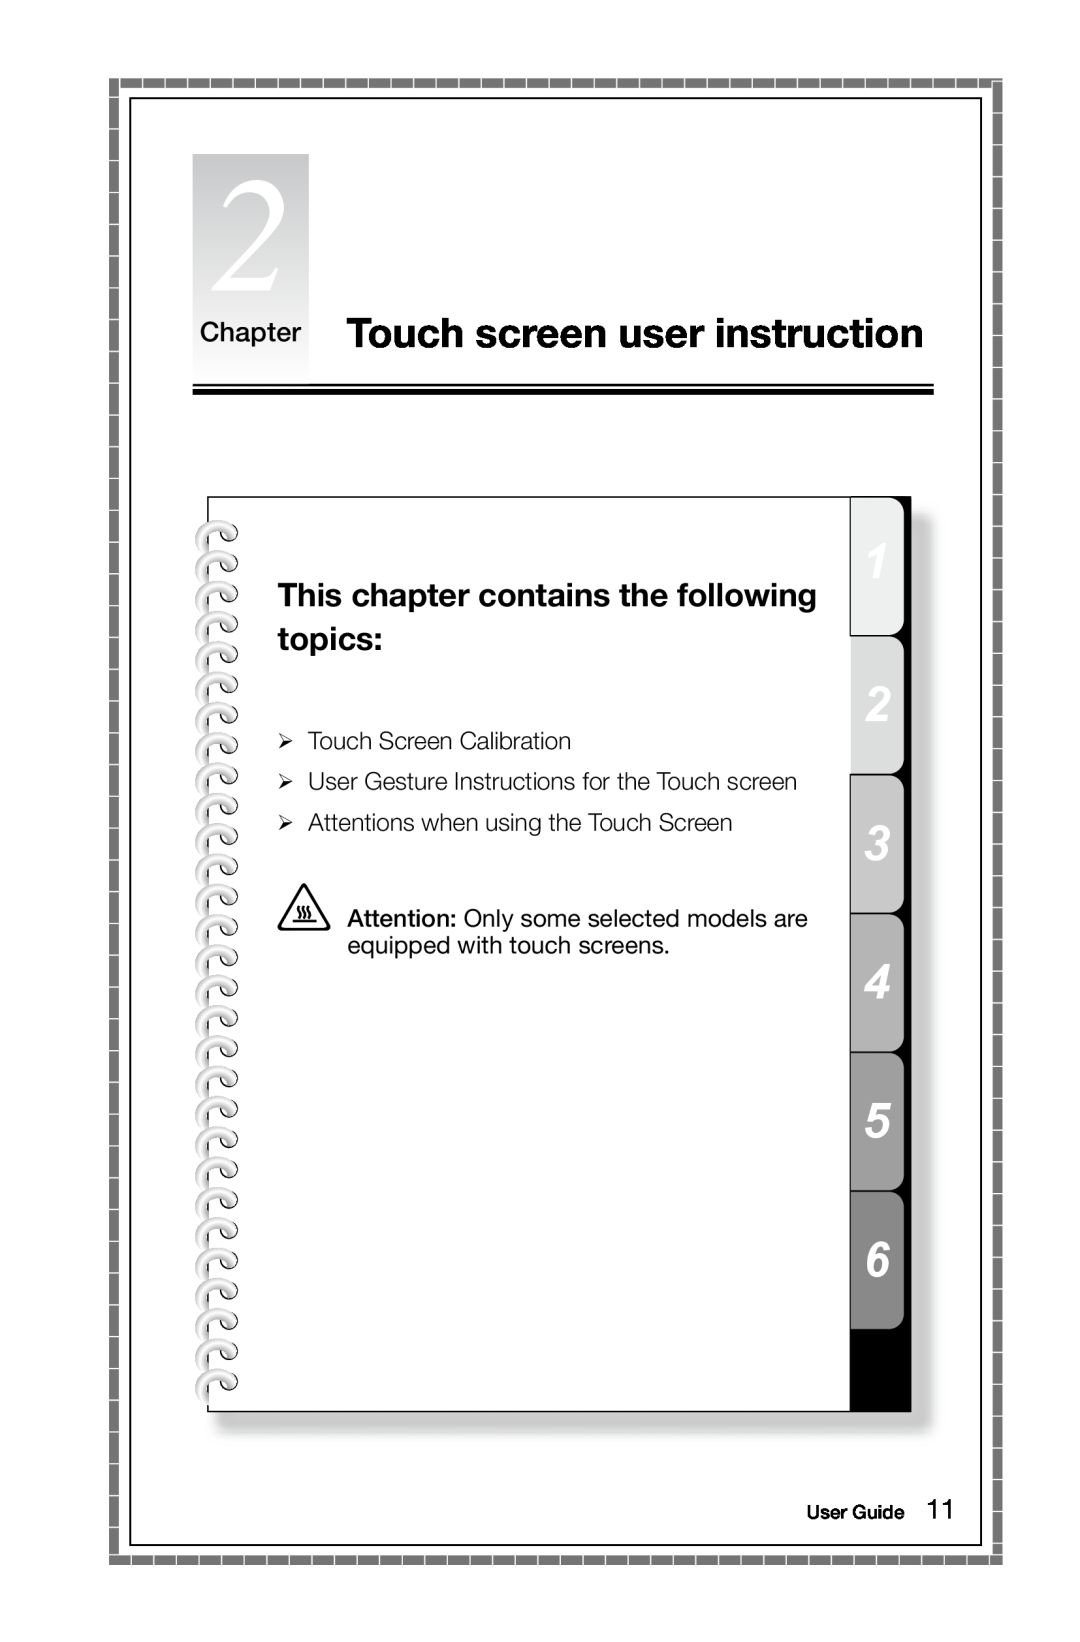 Lenovo 2566 [B340] 10099, 97 Chapter Touch screen user instruction, This chapter contains the following topics, User Guide 